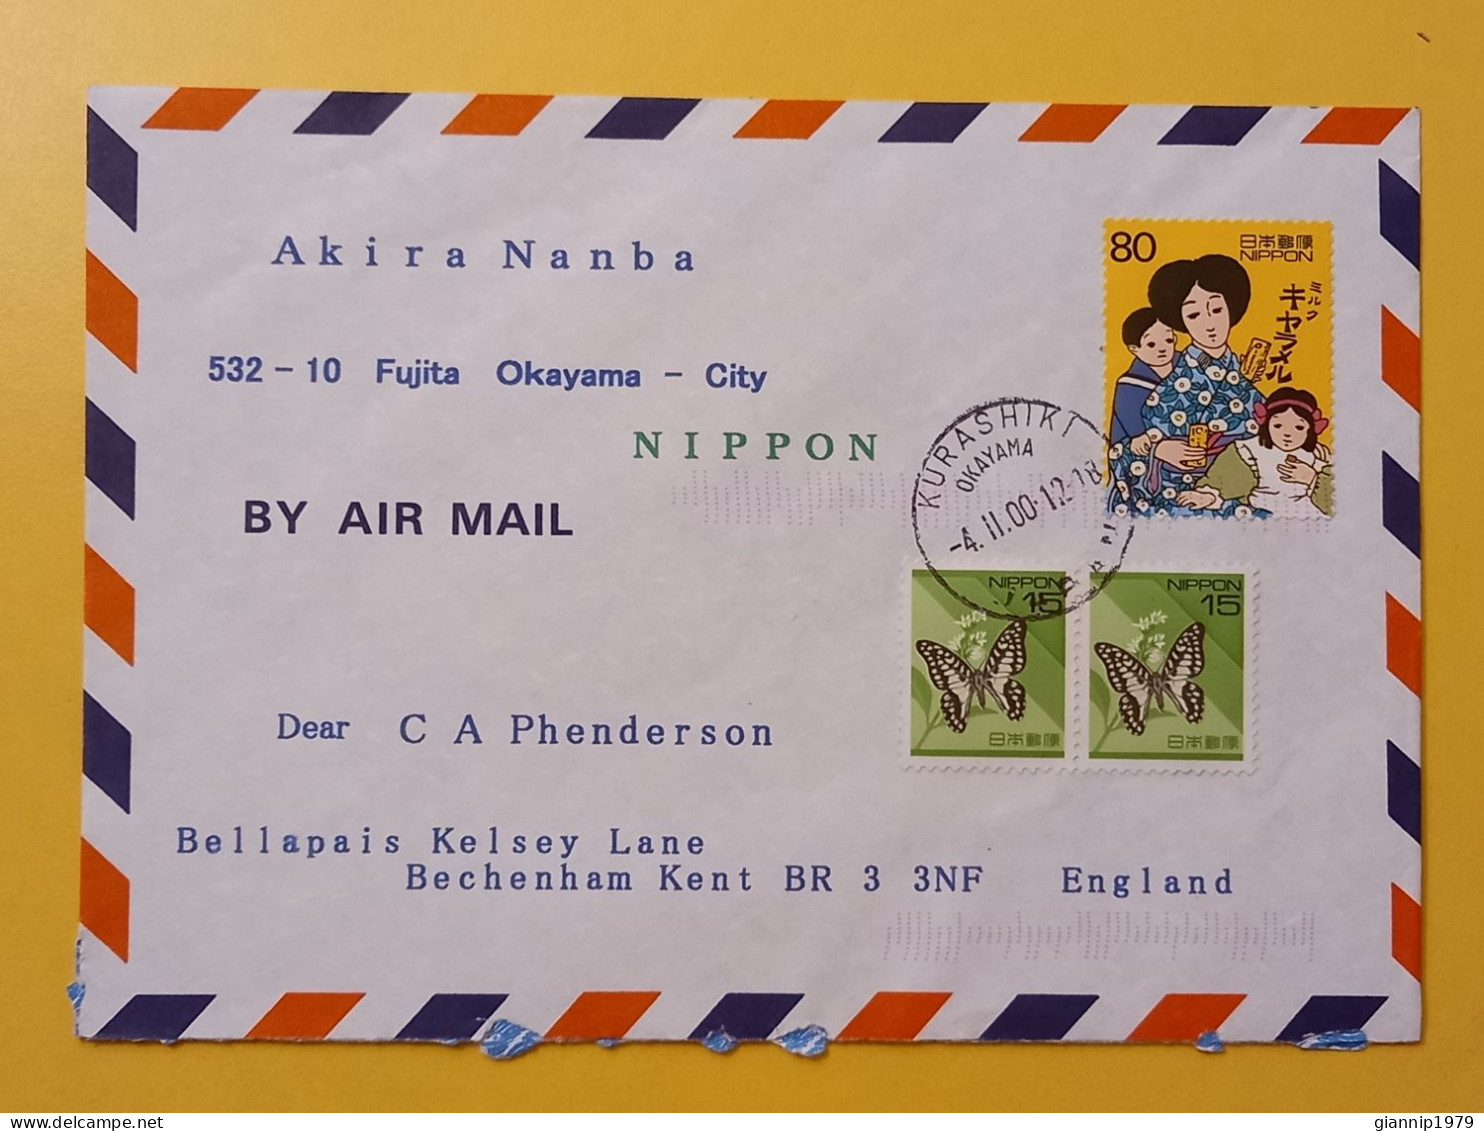 2000 BUSTA COVER AIR MAIL GIAPPONE JAPAN NIPPON BOLLO FARFALLE BUTTERFILES OBLITERE' KURASHIKI FOR ENGLAND - Covers & Documents